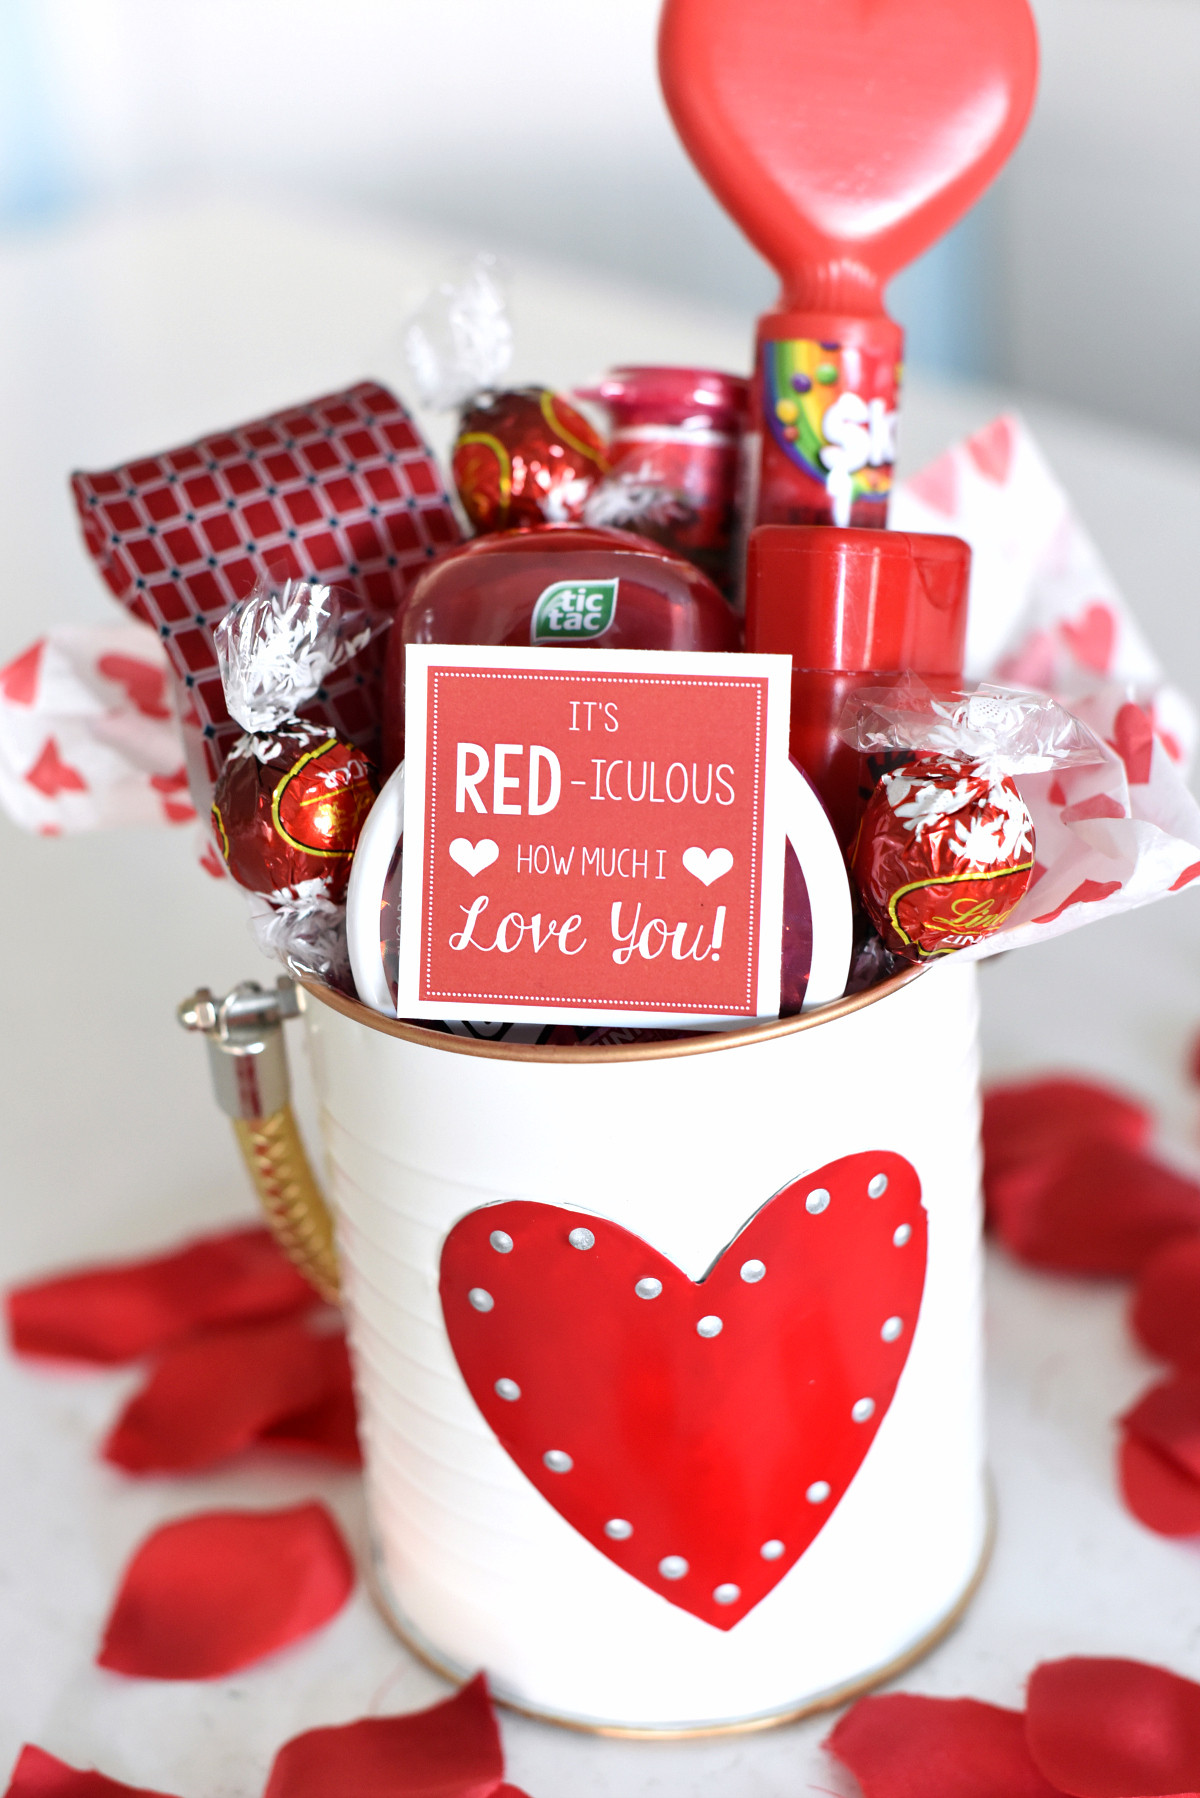 Valentines Day Gift Ideas For Husband
 Cute Valentine s Day Gift Idea RED iculous Basket